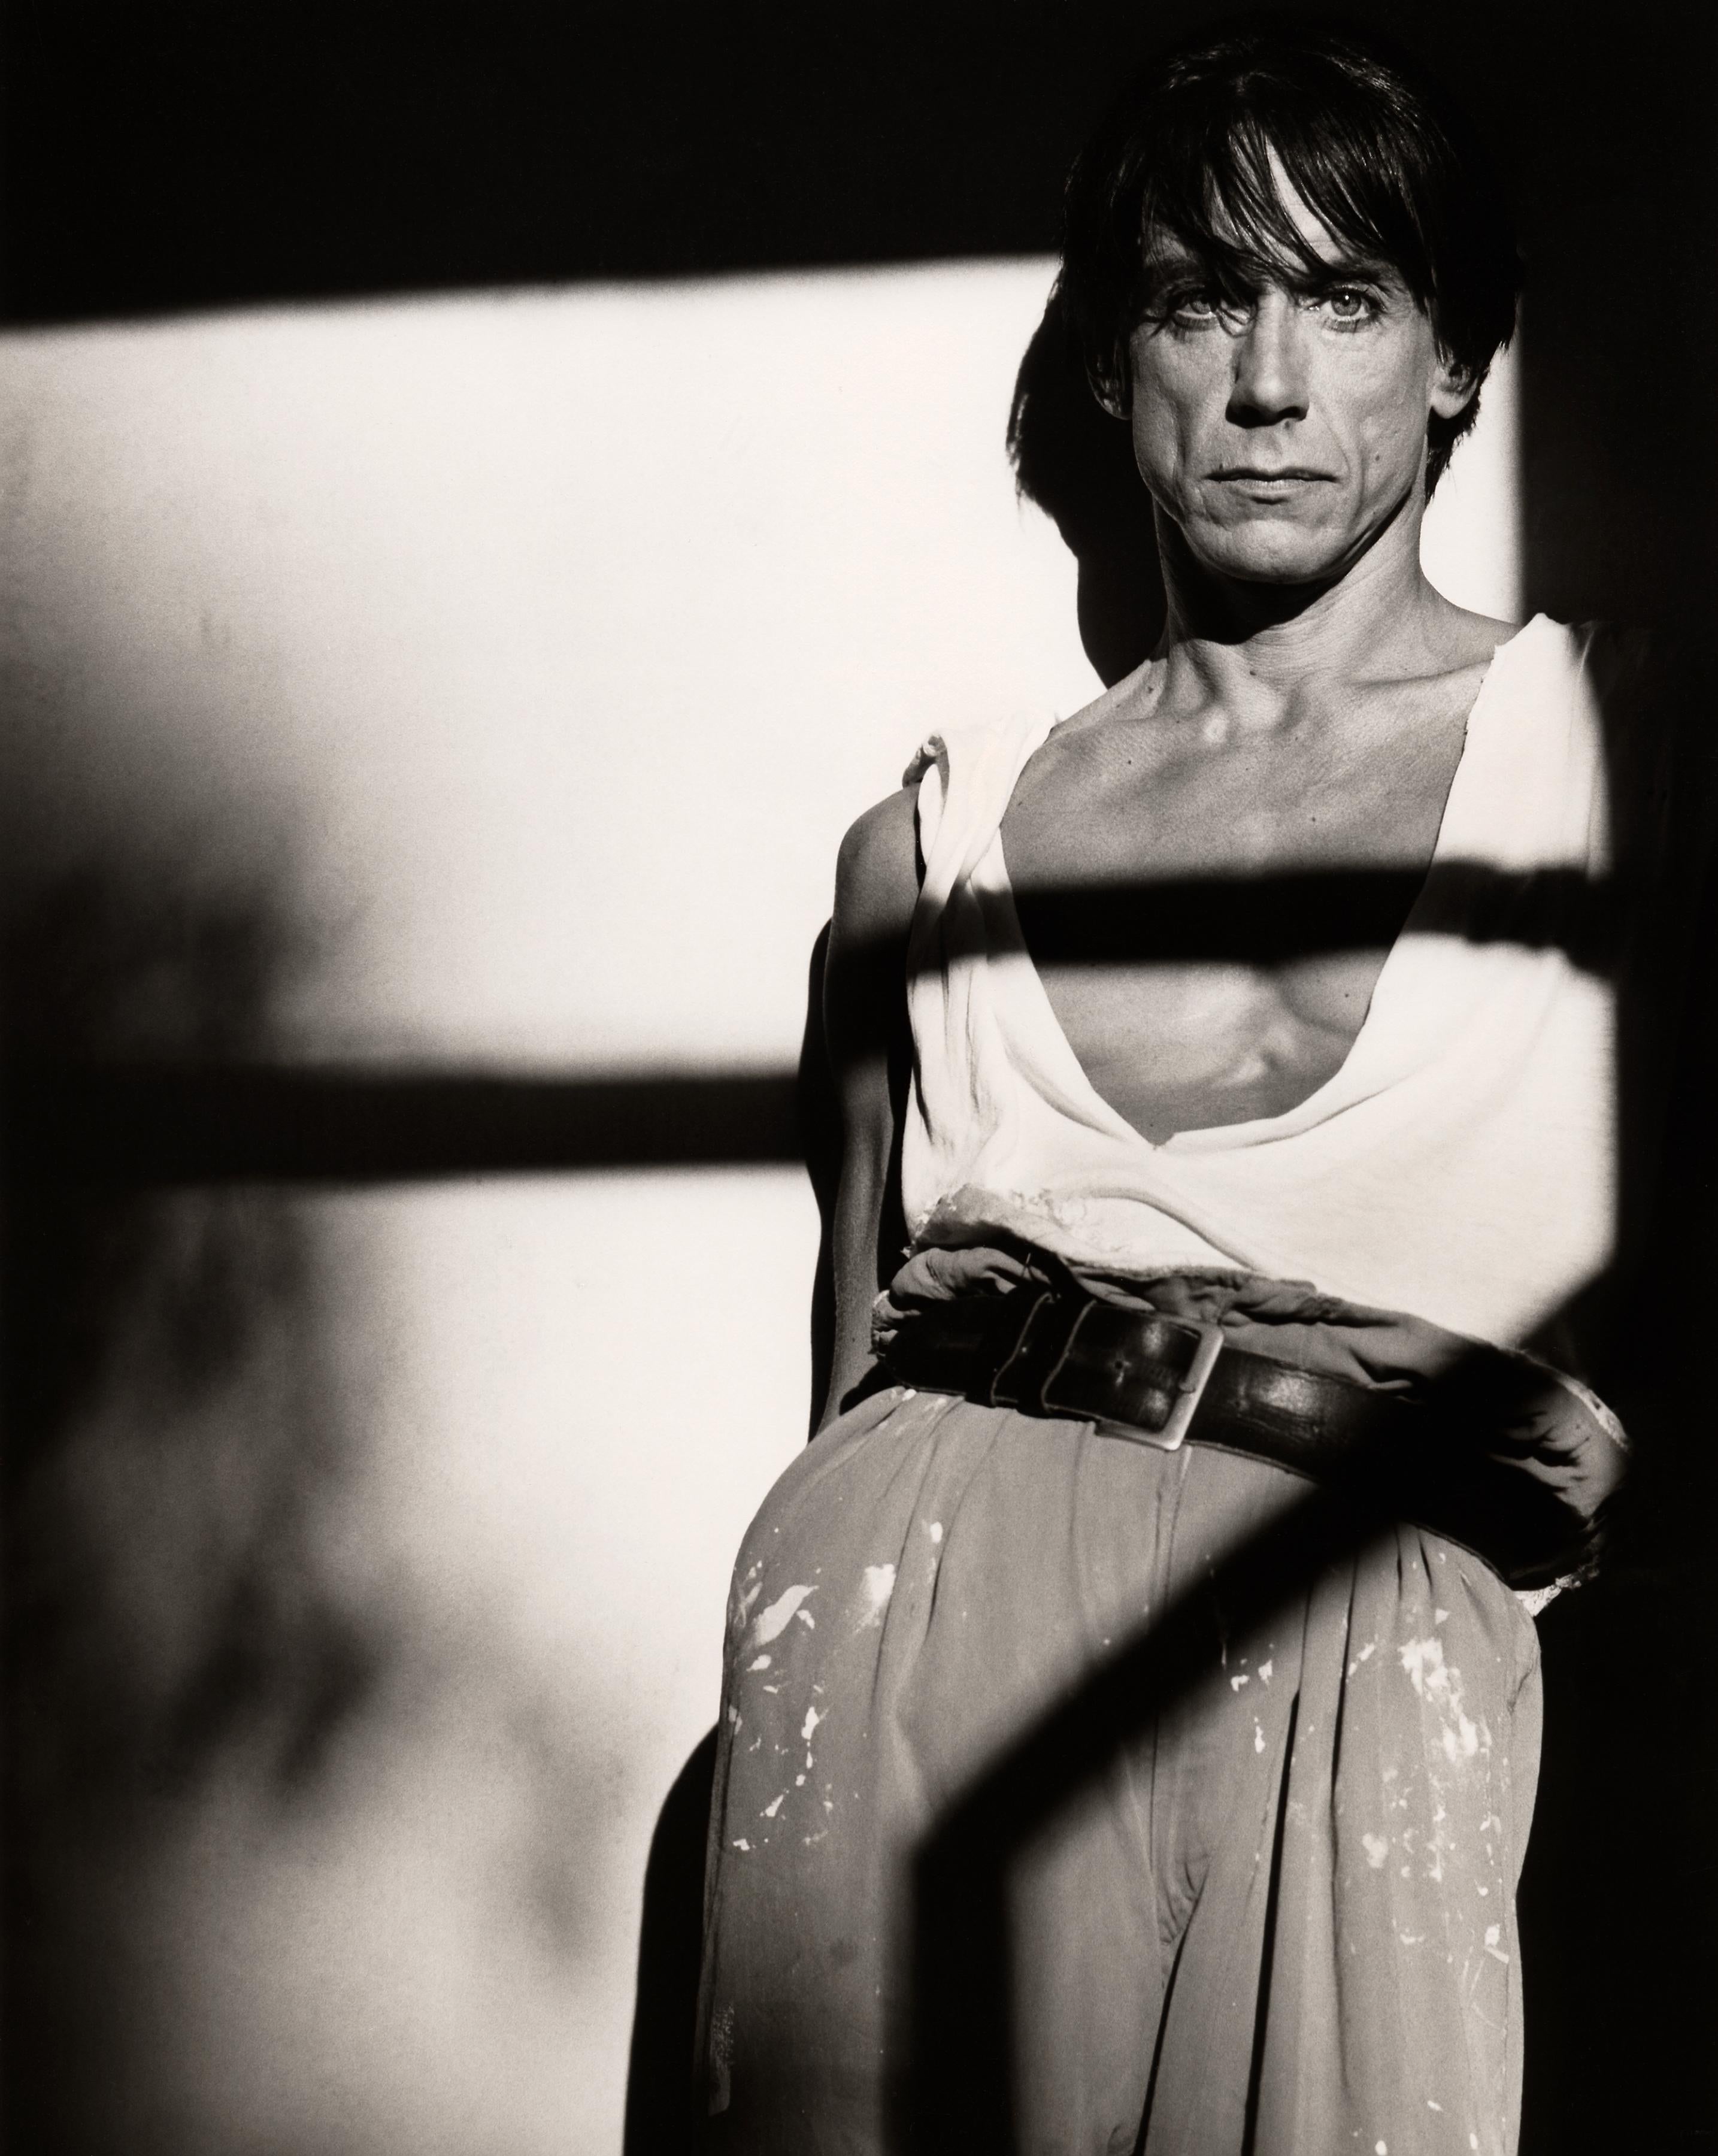 Greg Gorman Black and White Photograph - Iggy Pop in Painter's pants, Contemporary, celebrity, Photography